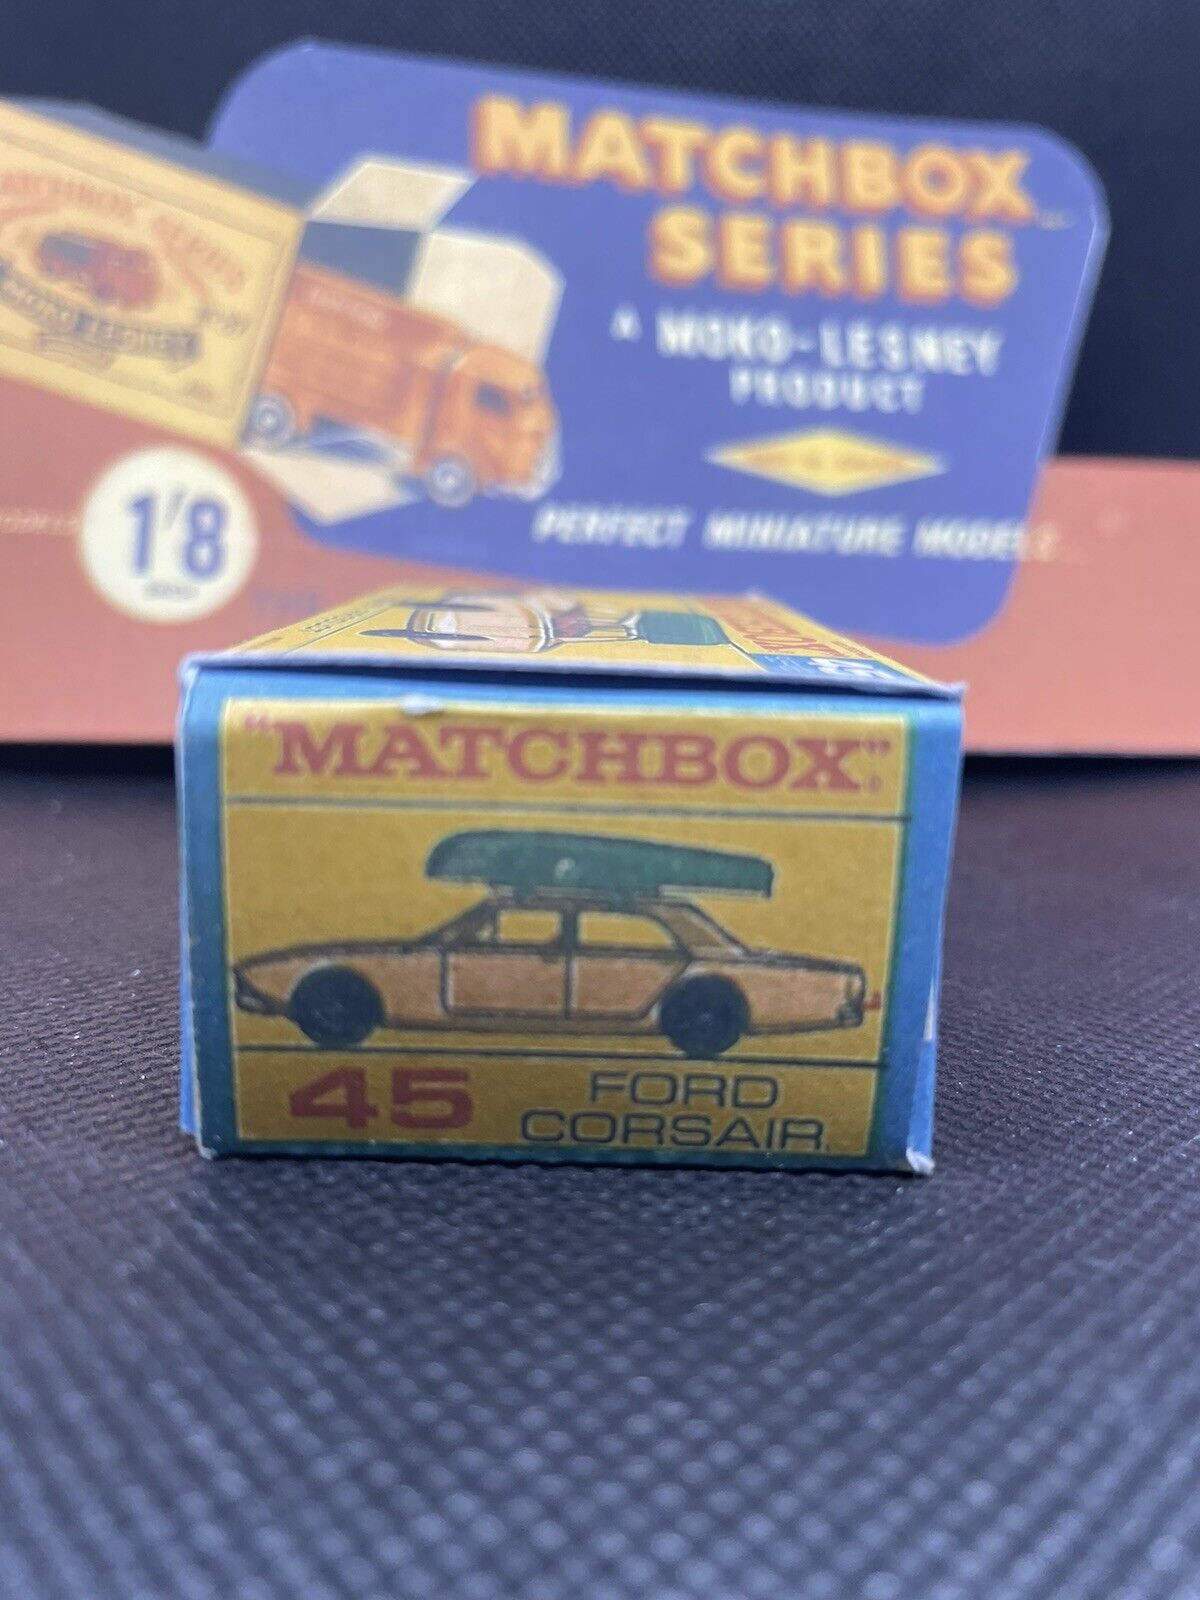 Matchbox Lesney 45 Ford Corsair EMPTY Reproduction Box ONLY NO CAR